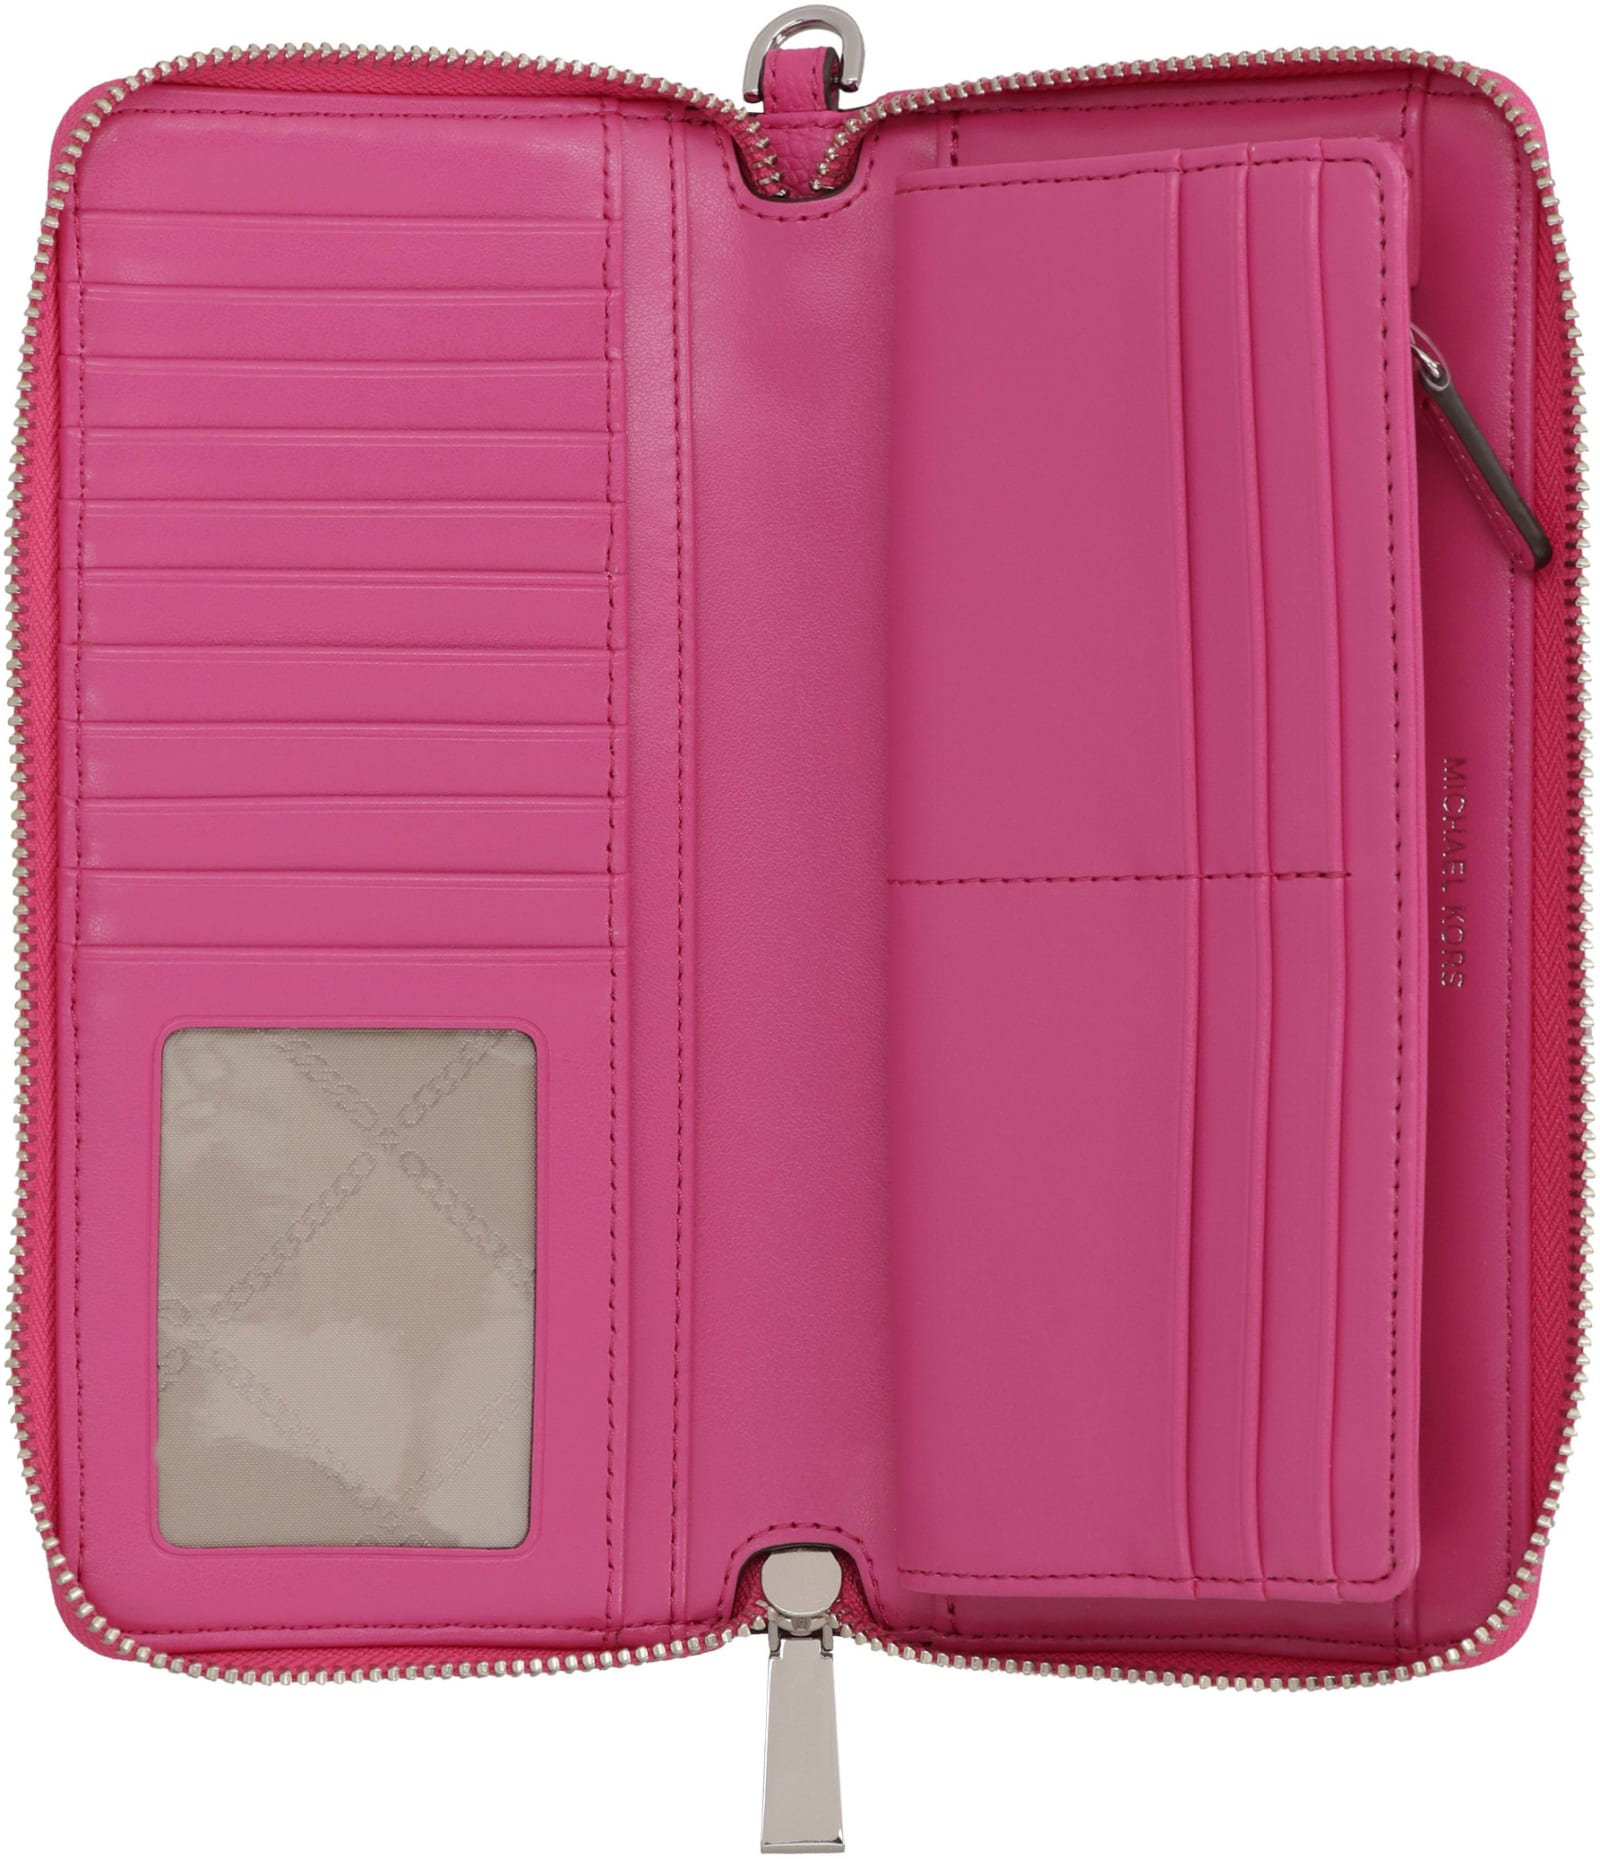 Jet set leather wallet Michael Kors Pink in Leather - 16157683